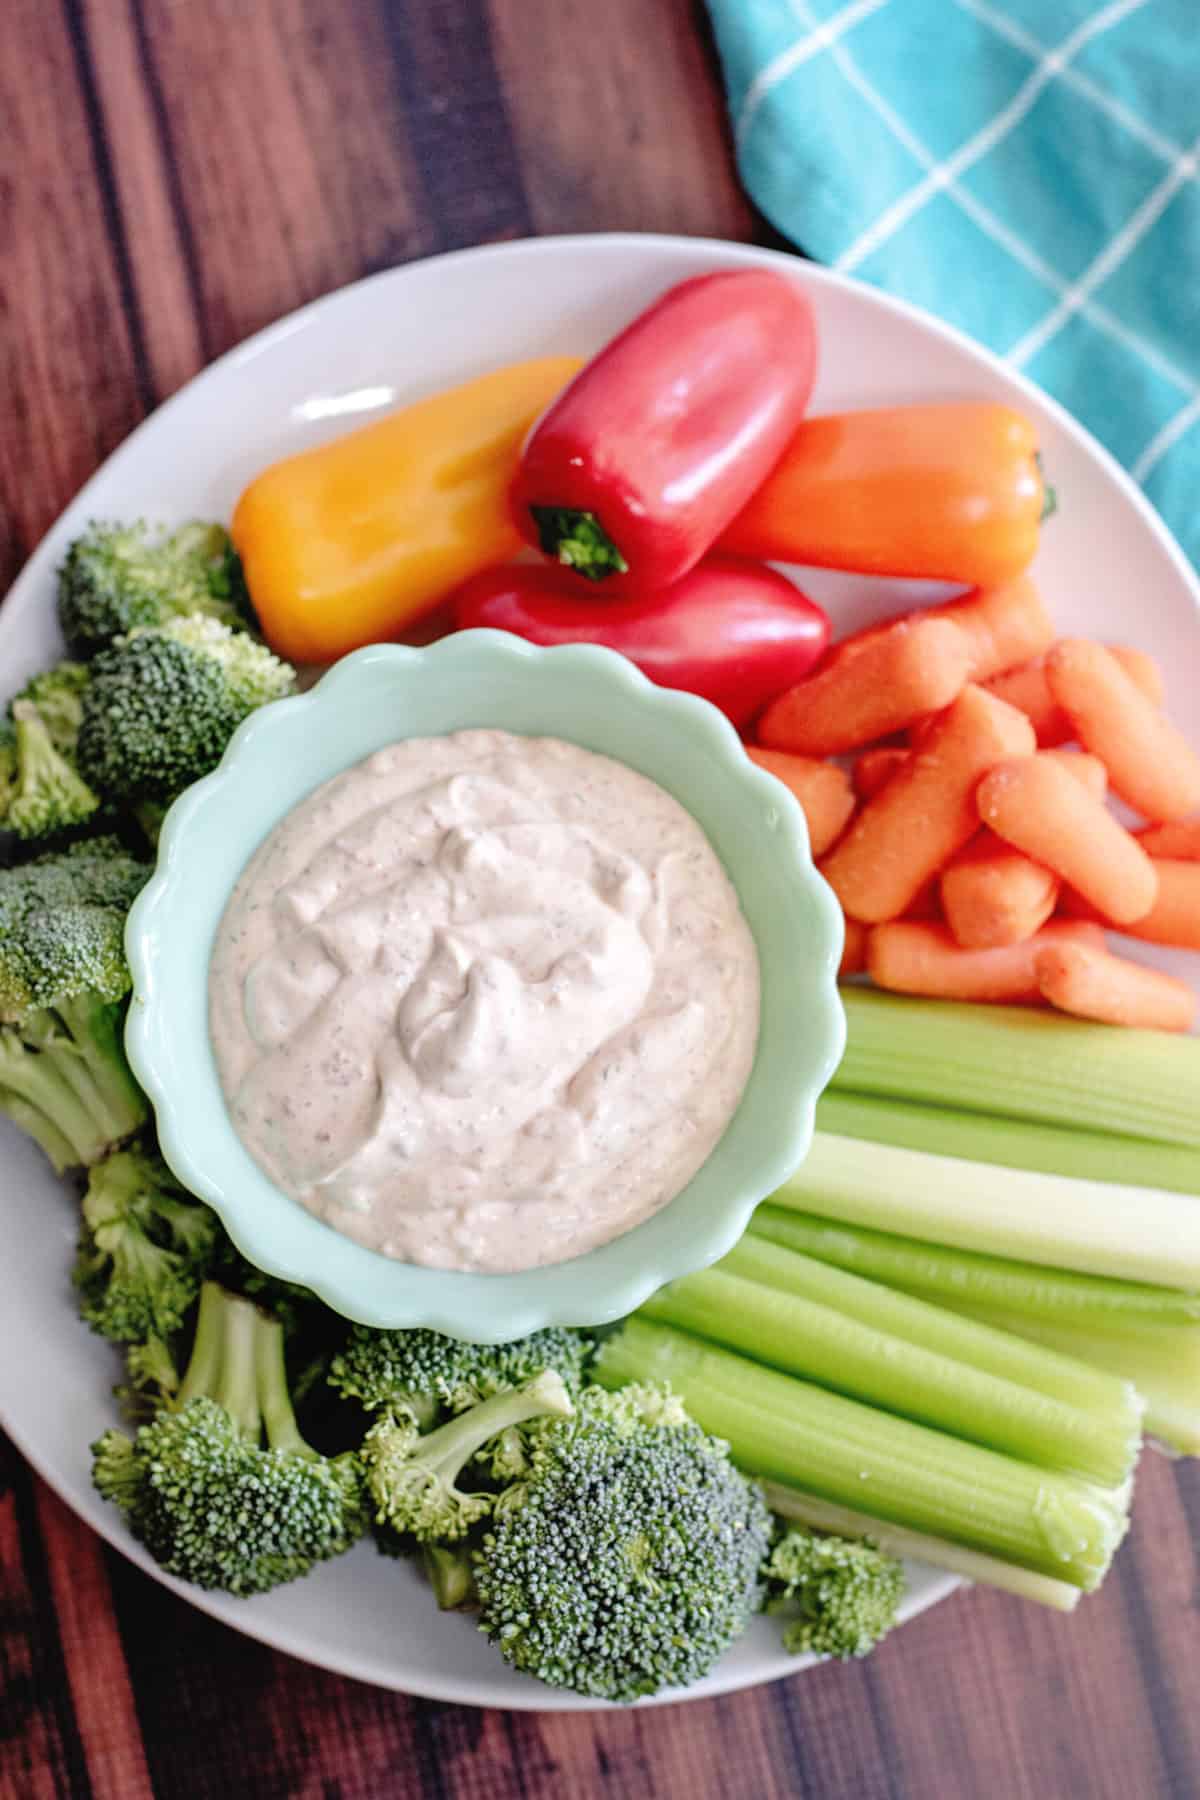 Chipotle ranch dressing surrounded by vegetables on serving plate.